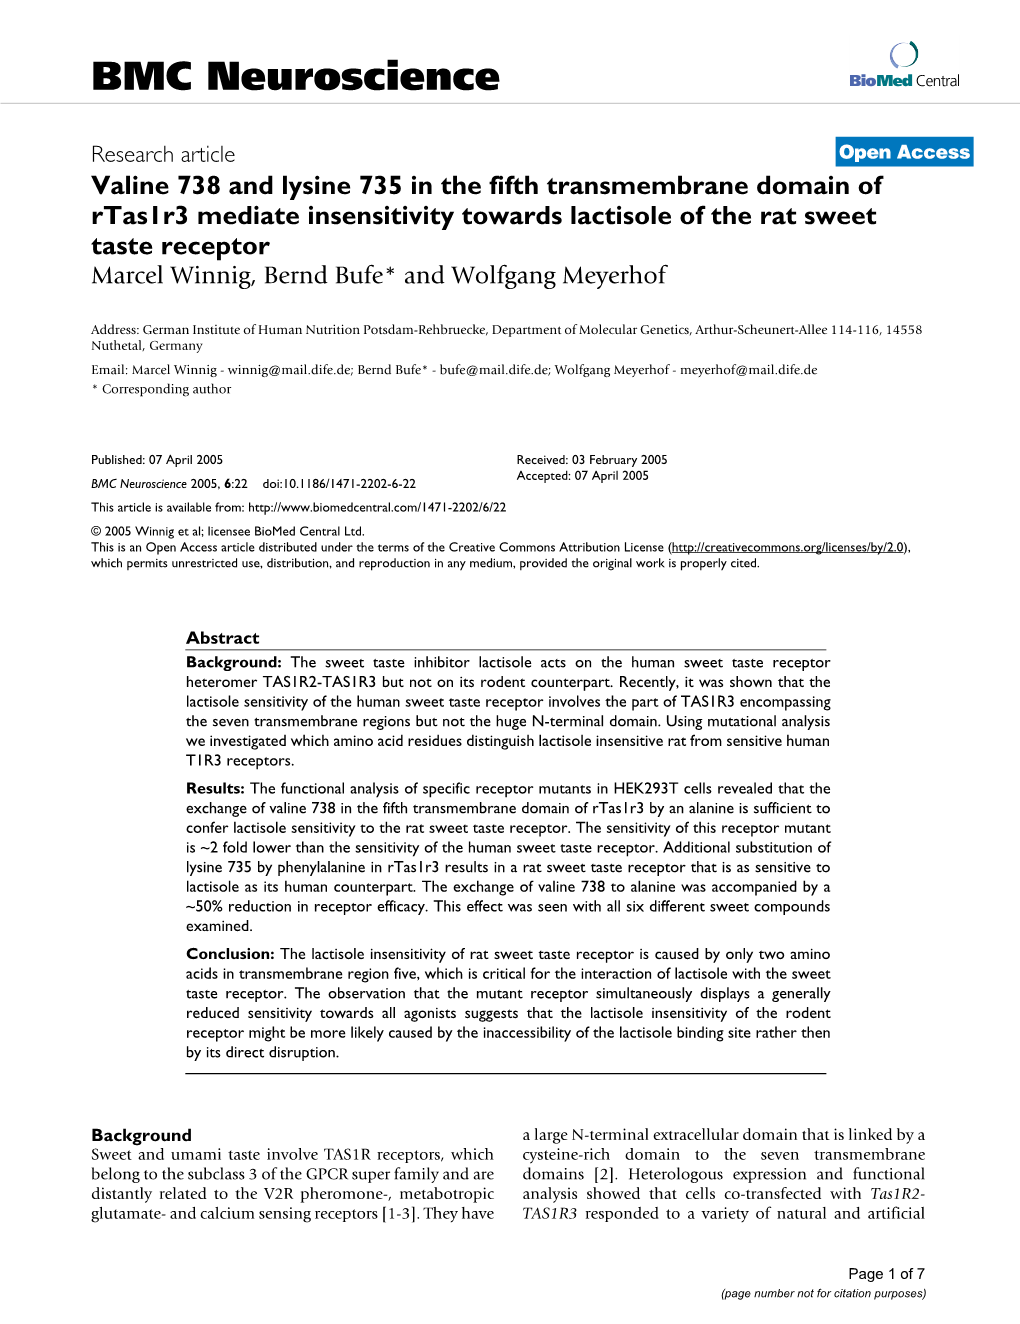 Valine 738 and Lysine 735 in the Fifth Transmembrane Domain of Rtas1r3